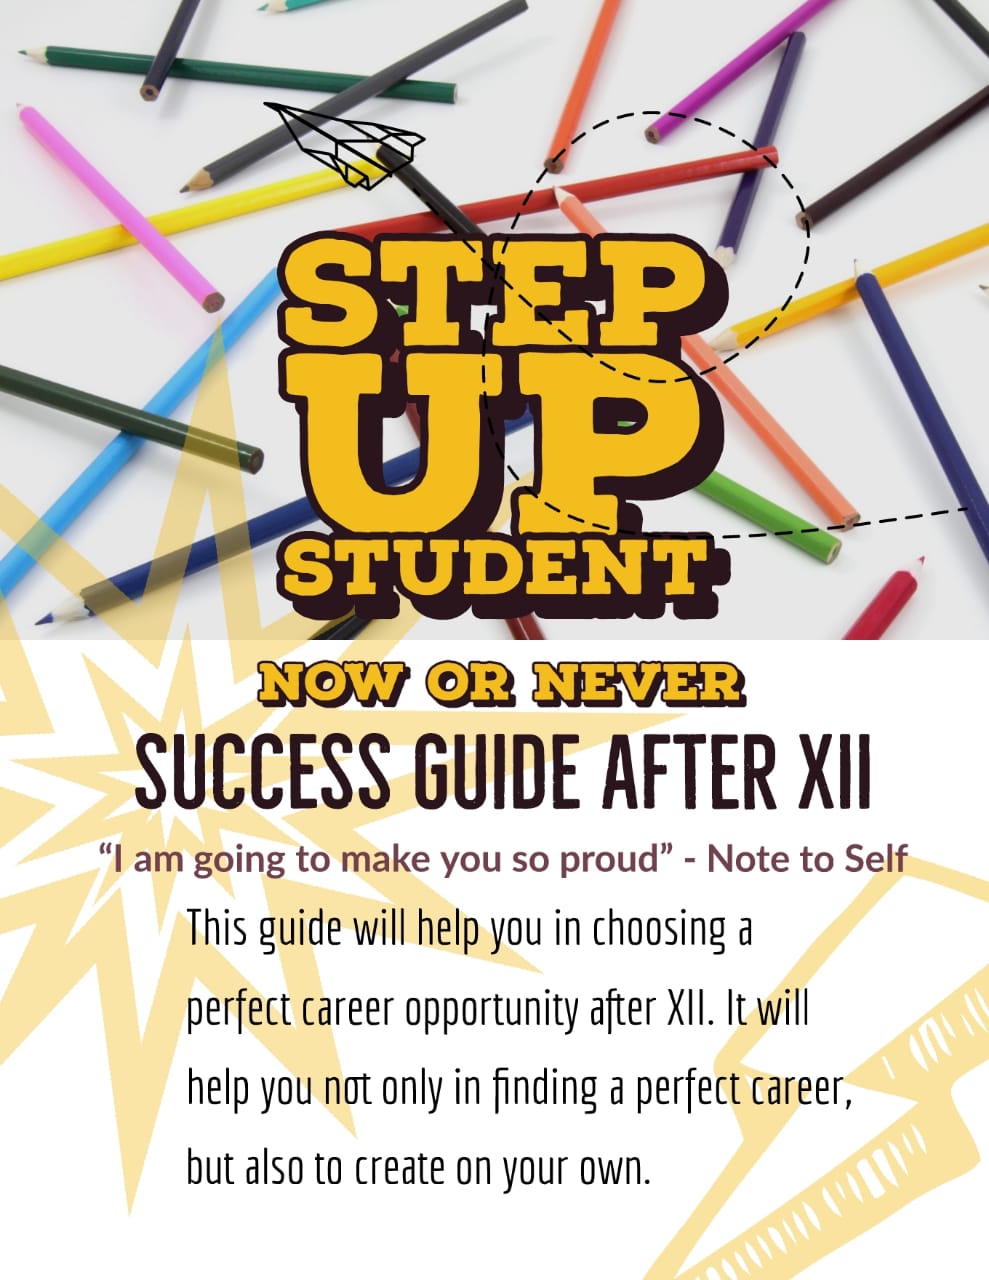 SUCCESS GUIDE AFTER XII